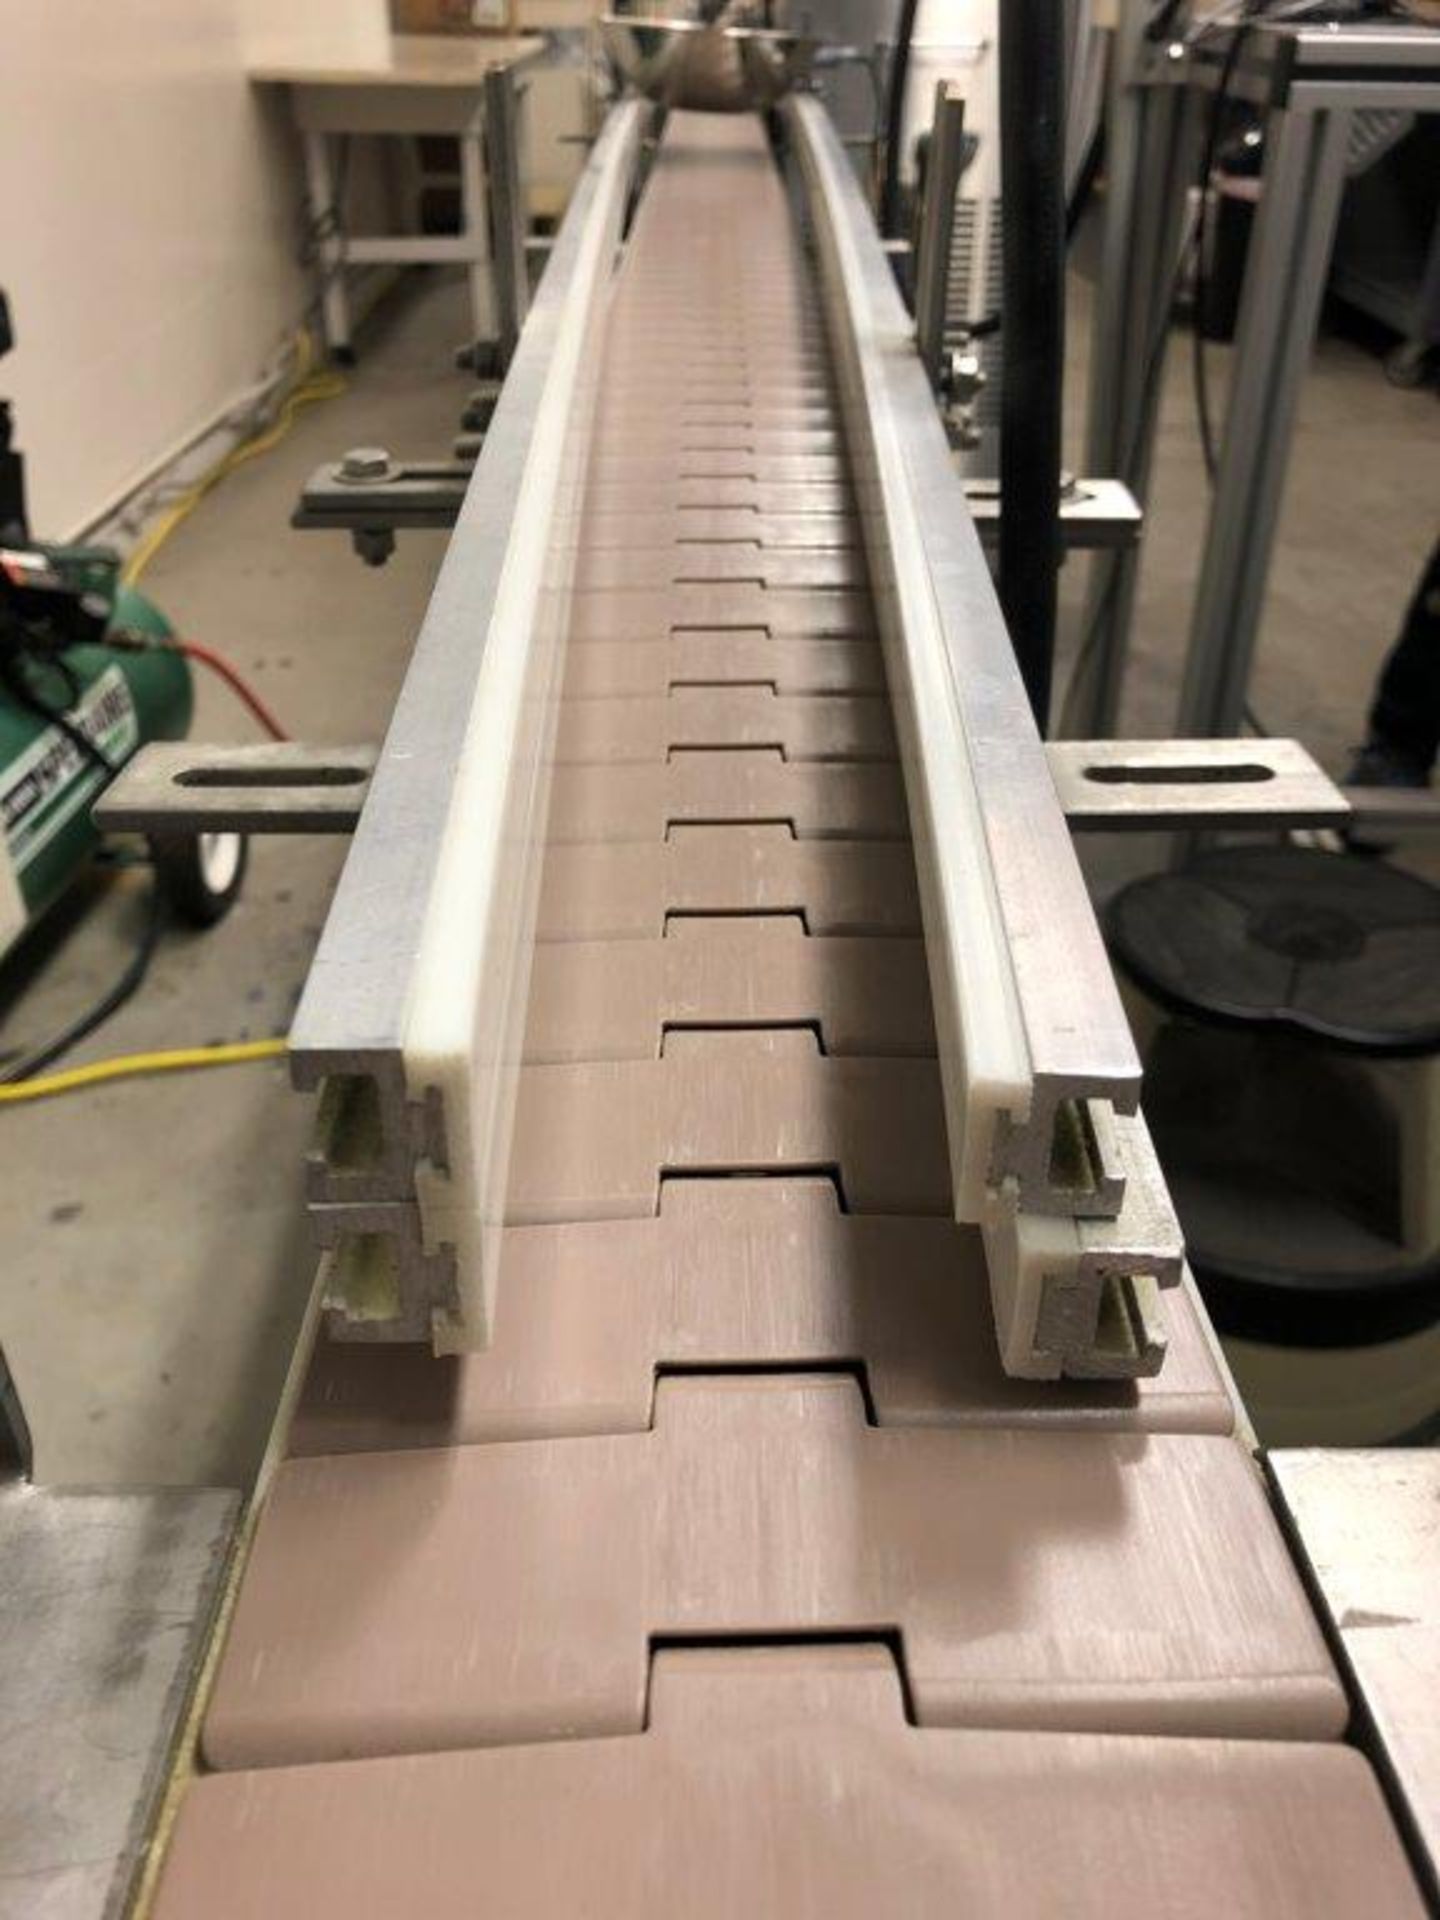 Conveyor Belt with Vaiable Speed Drive Control. (SUBJECT TO THE BULK BID ON LOT 4) - Image 6 of 9